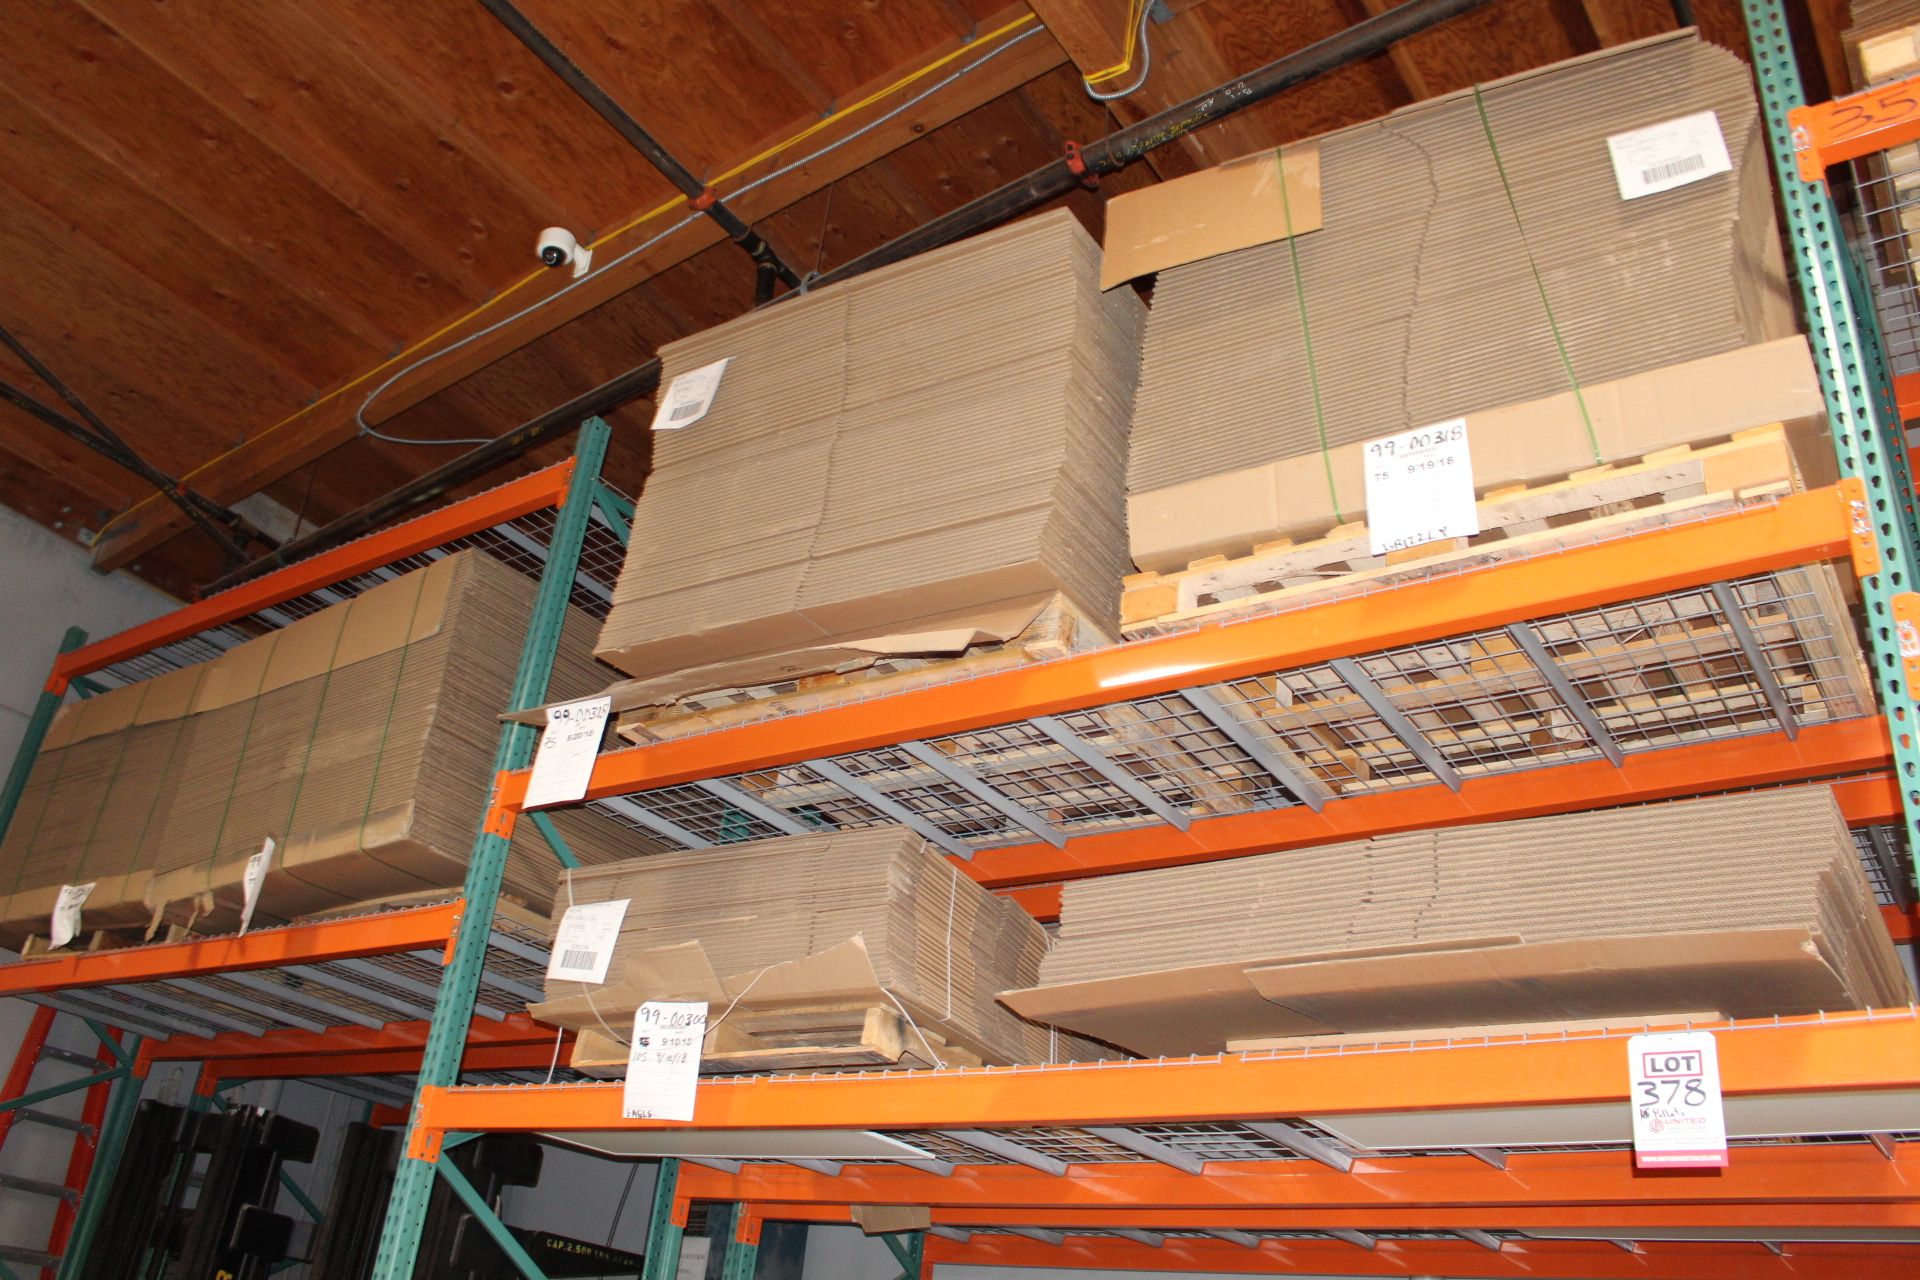 LOT - (16) PALLETS OF CARDBOARD BOXES, MULTIPLE SIZES (USED FOR SPEAKER CABINETS) - Image 3 of 4